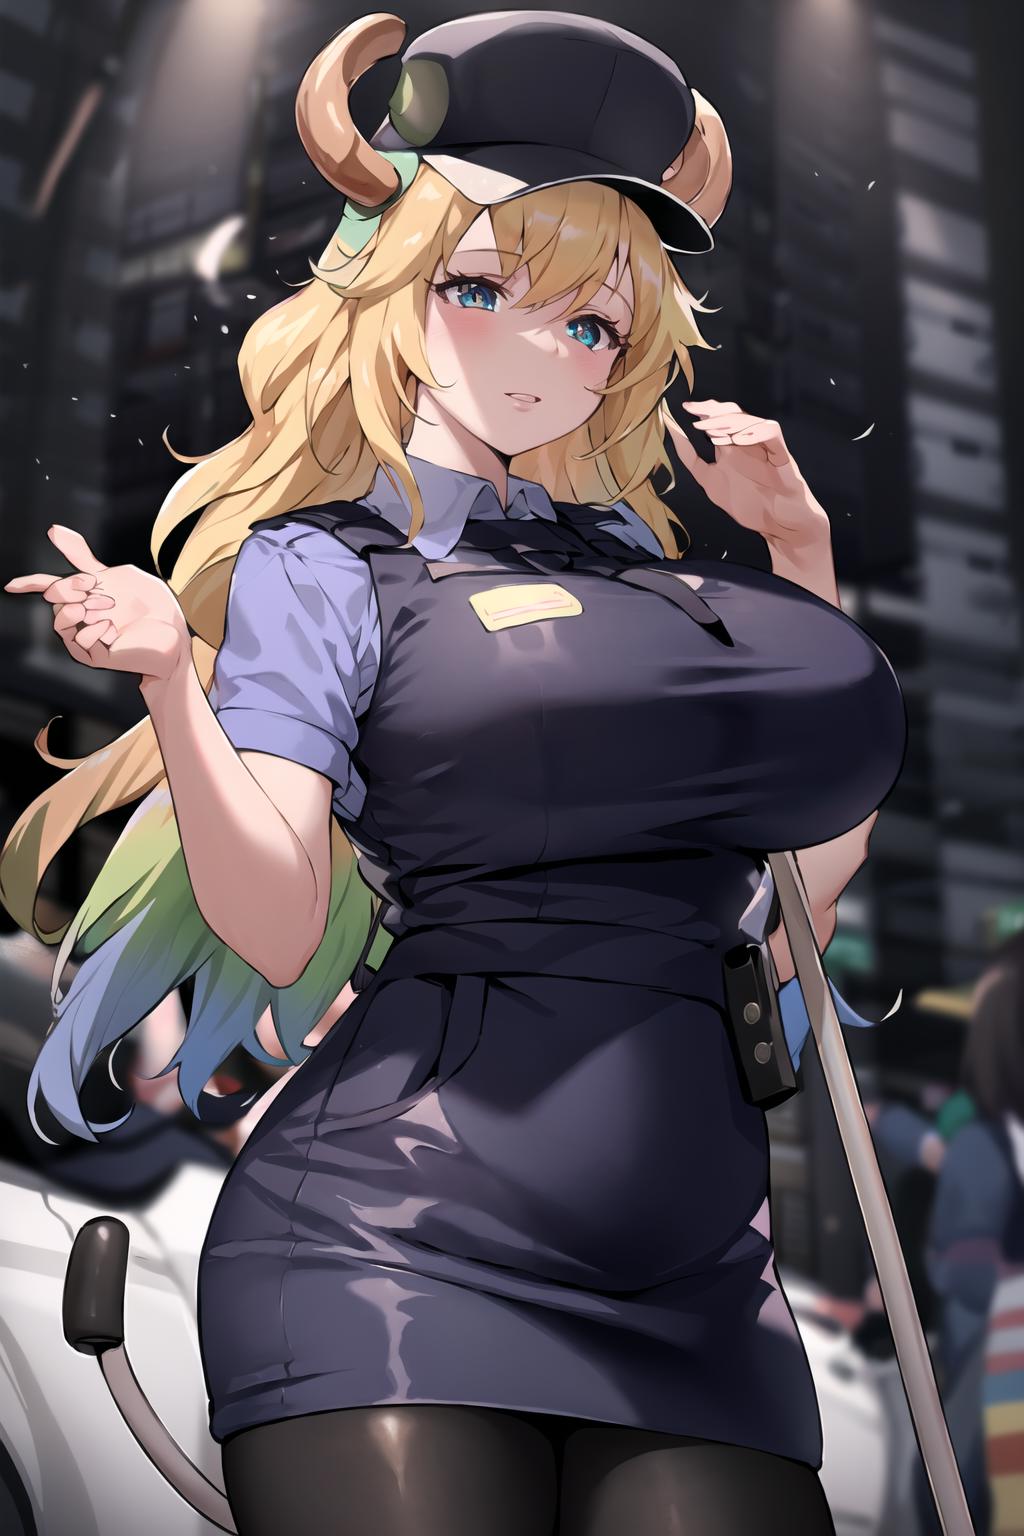 Change-A-Character: Good Cop, Your Waifu Upholds The Law! image by TwoMoreTimes89